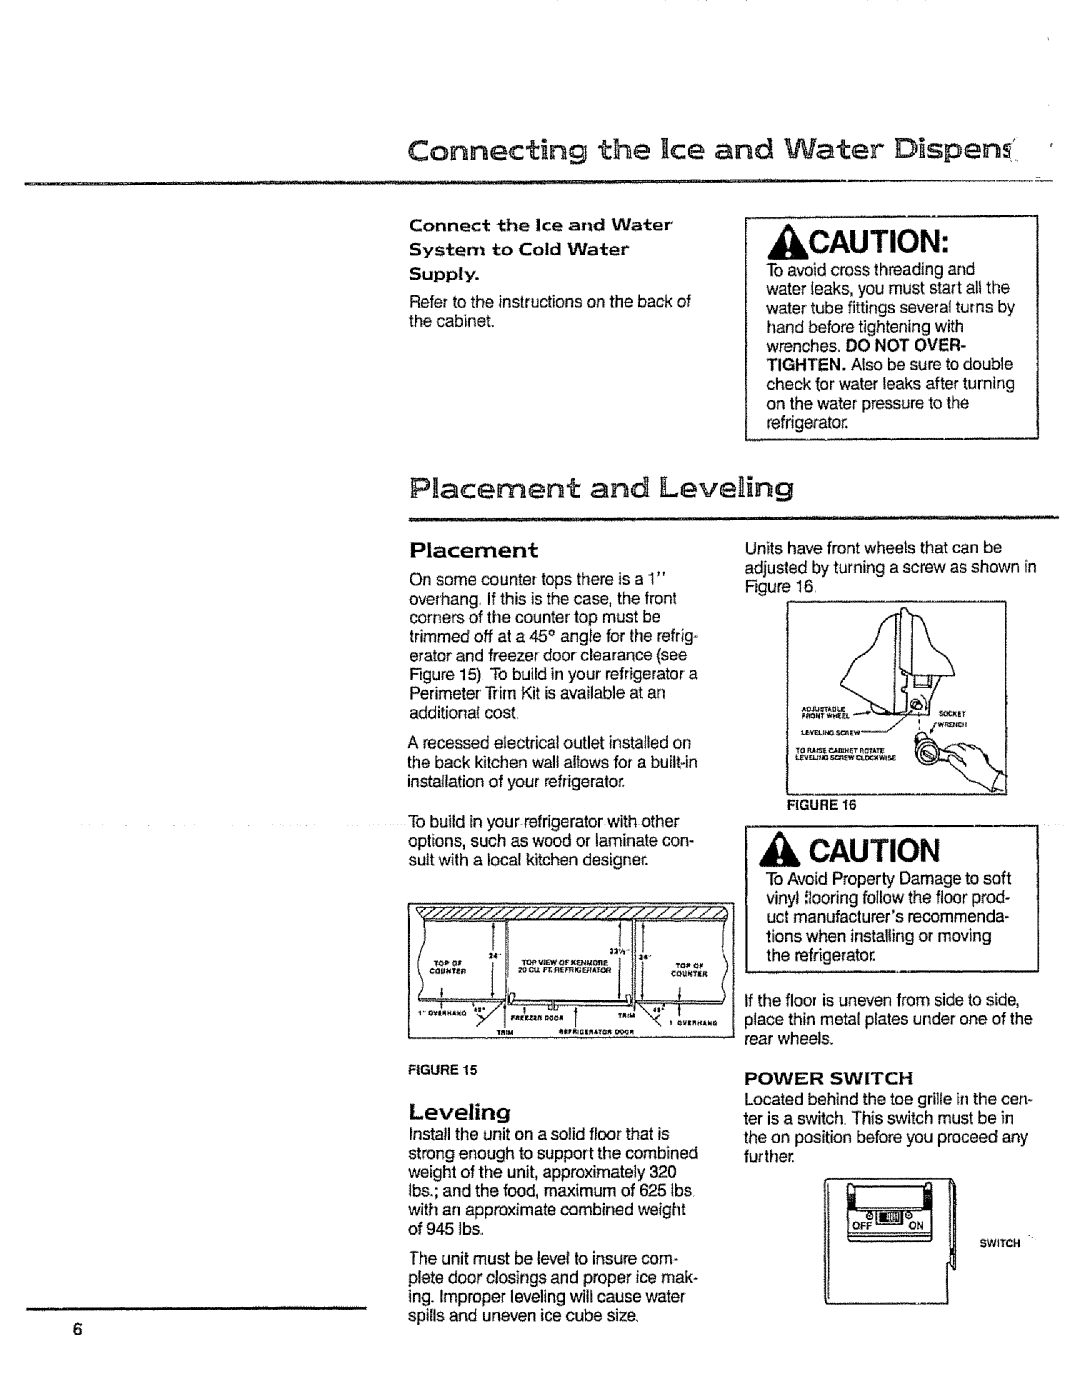 Sears 10062603 manual ll!,I tions when installingor moving, Pilacement and Leveling, Placement, Supply, Power Switch 